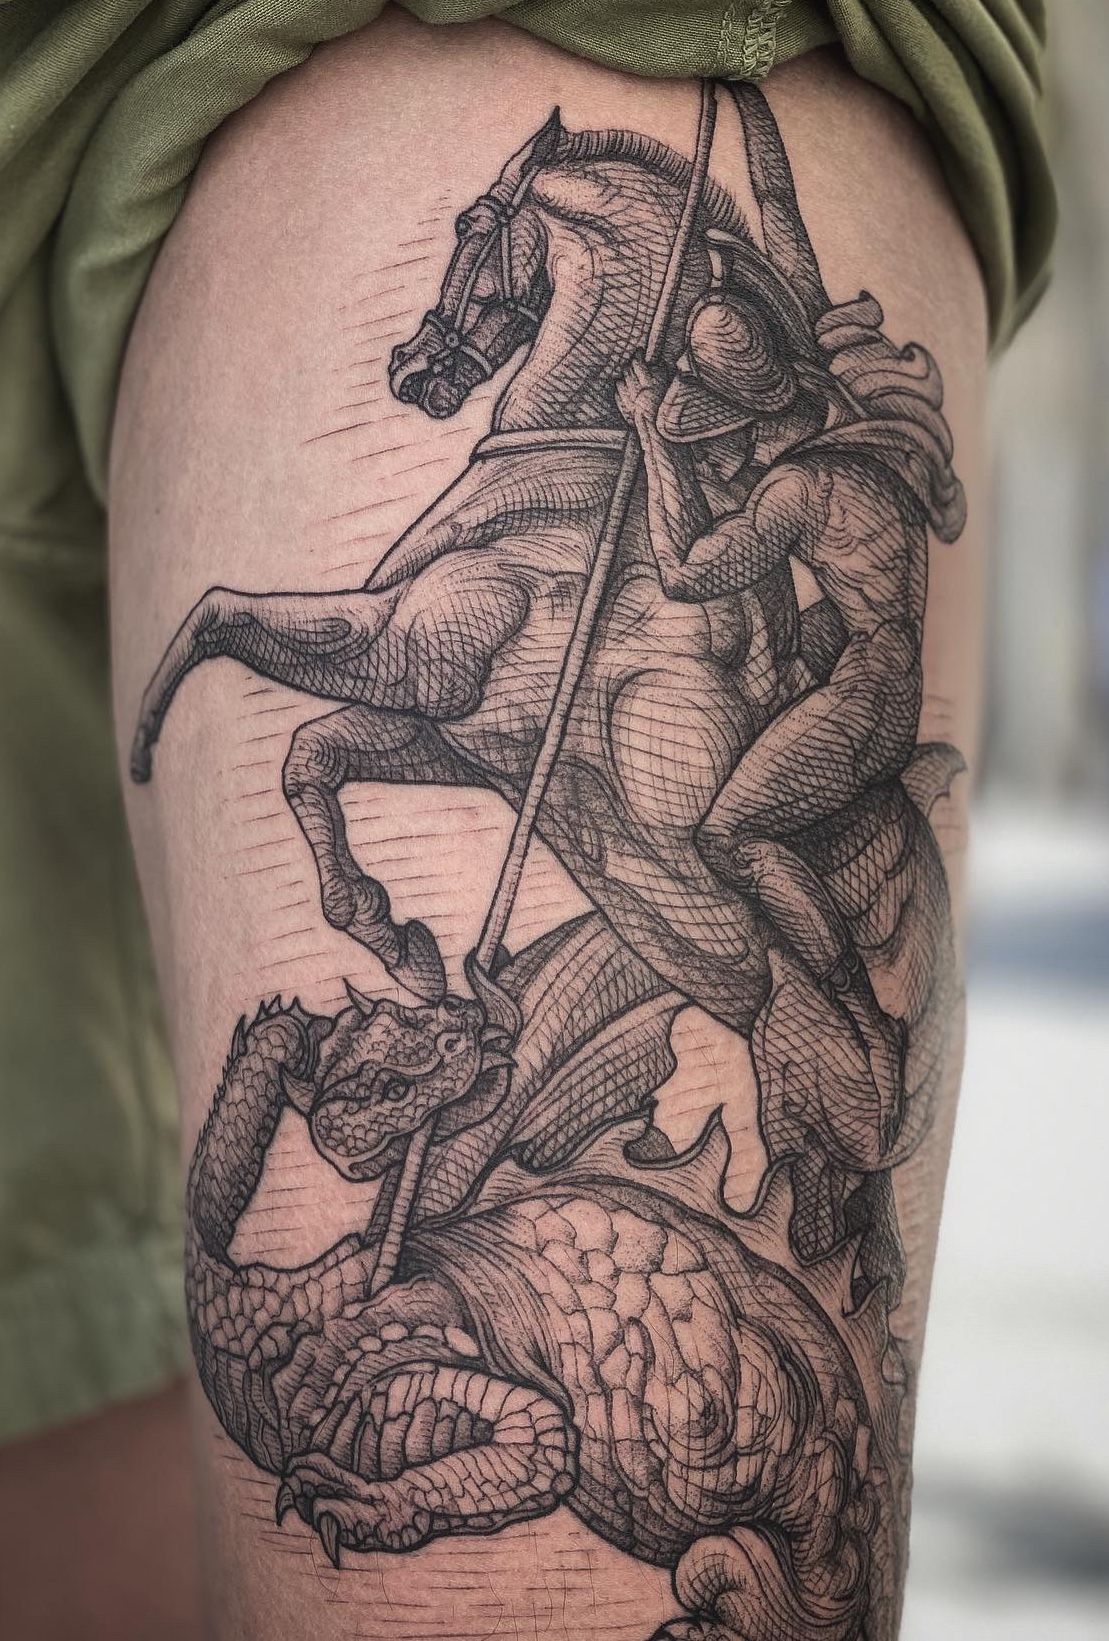 The meaning of the tattoo Saint George  Facts and photos of tattoo designs  for tattoovaluenet  YouTube